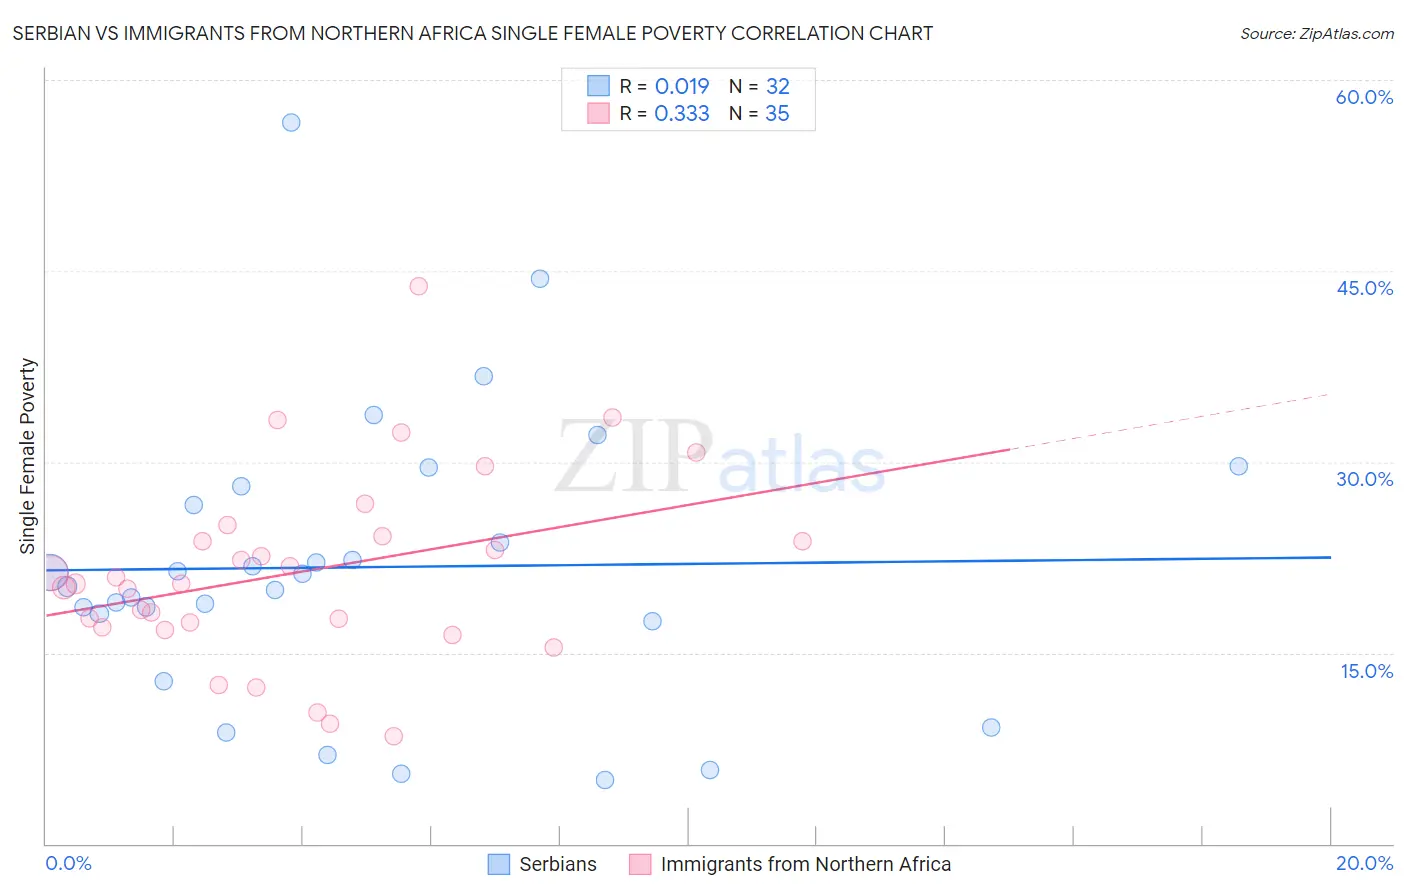 Serbian vs Immigrants from Northern Africa Single Female Poverty